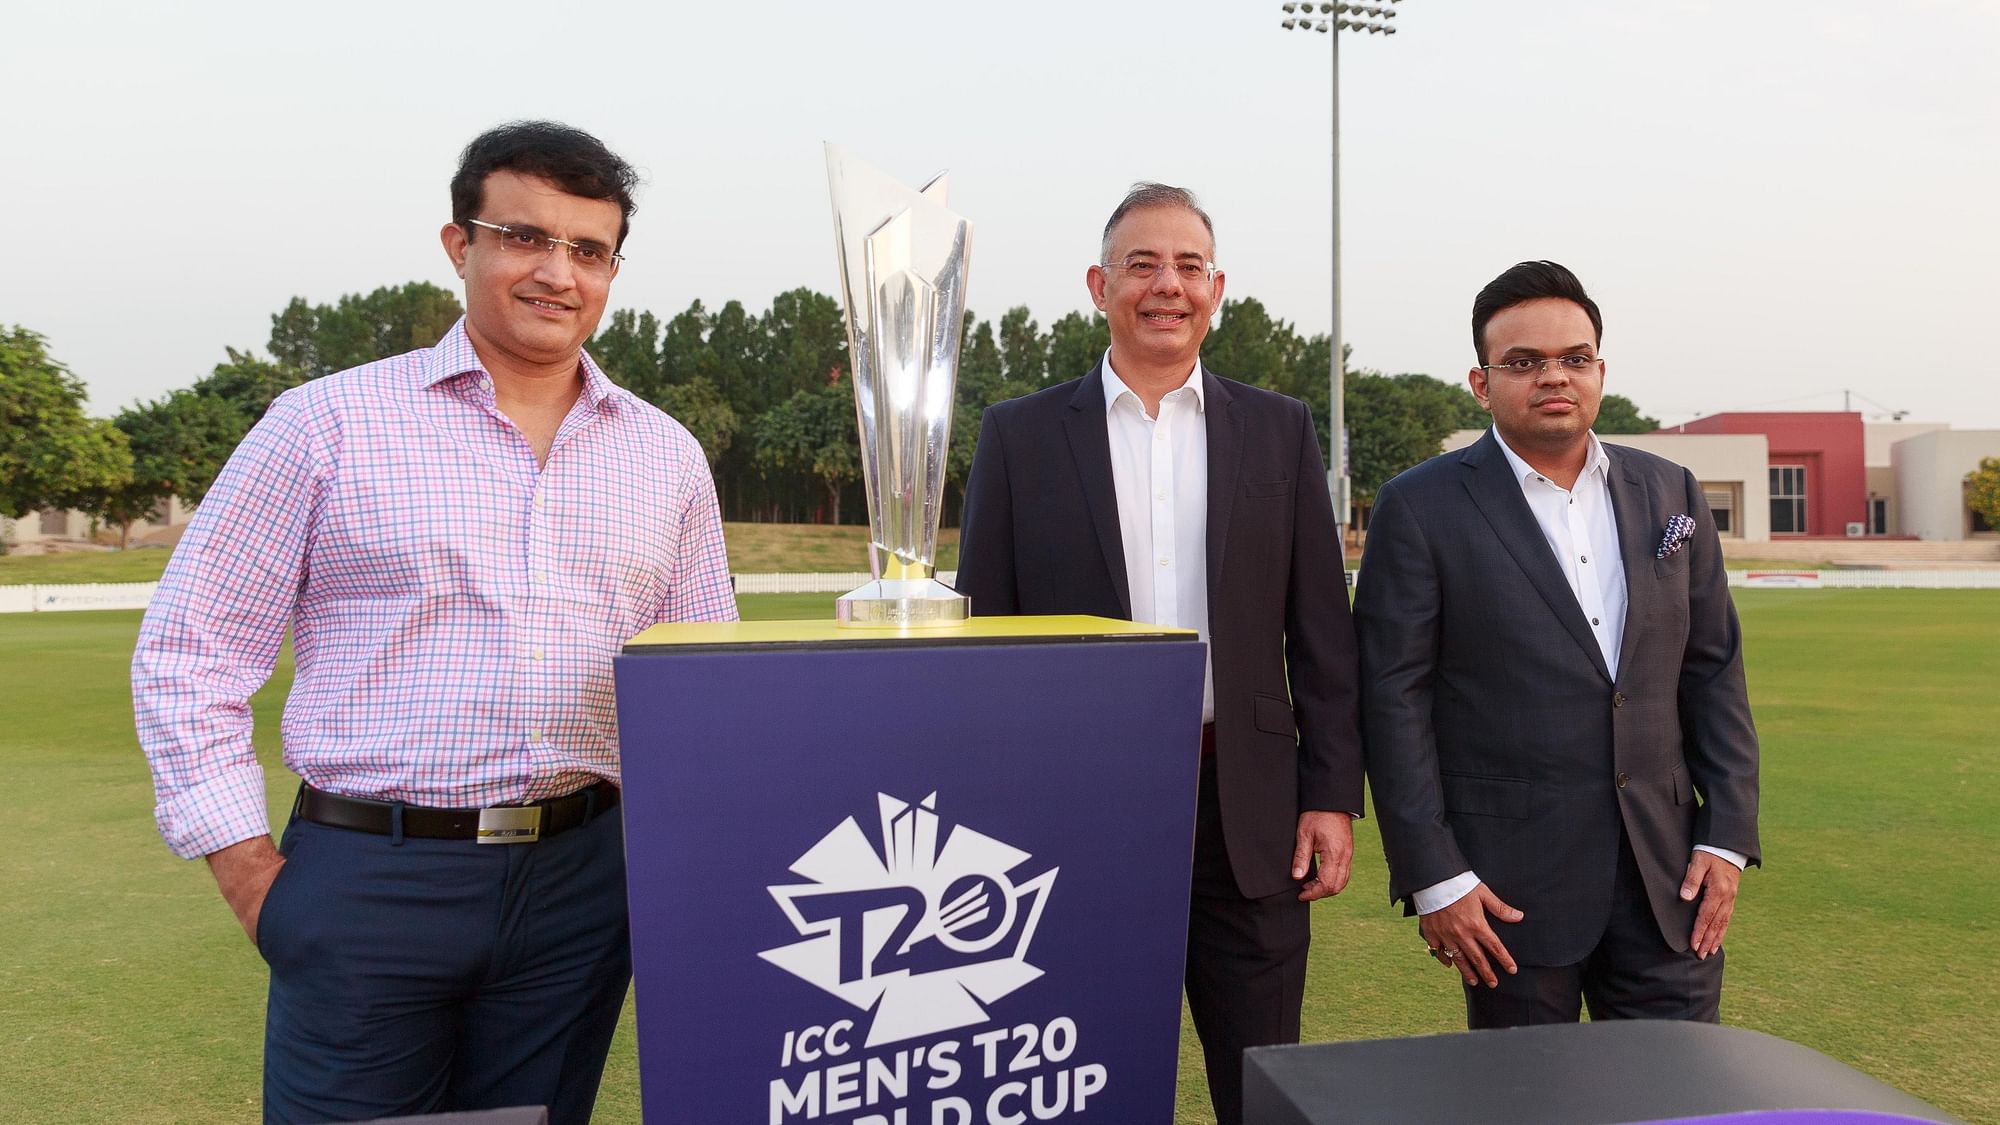 Sourav Ganguly and Jay Shah at an ICC T20 World Cup event last year. India are the official hosts of the 2021 edition.